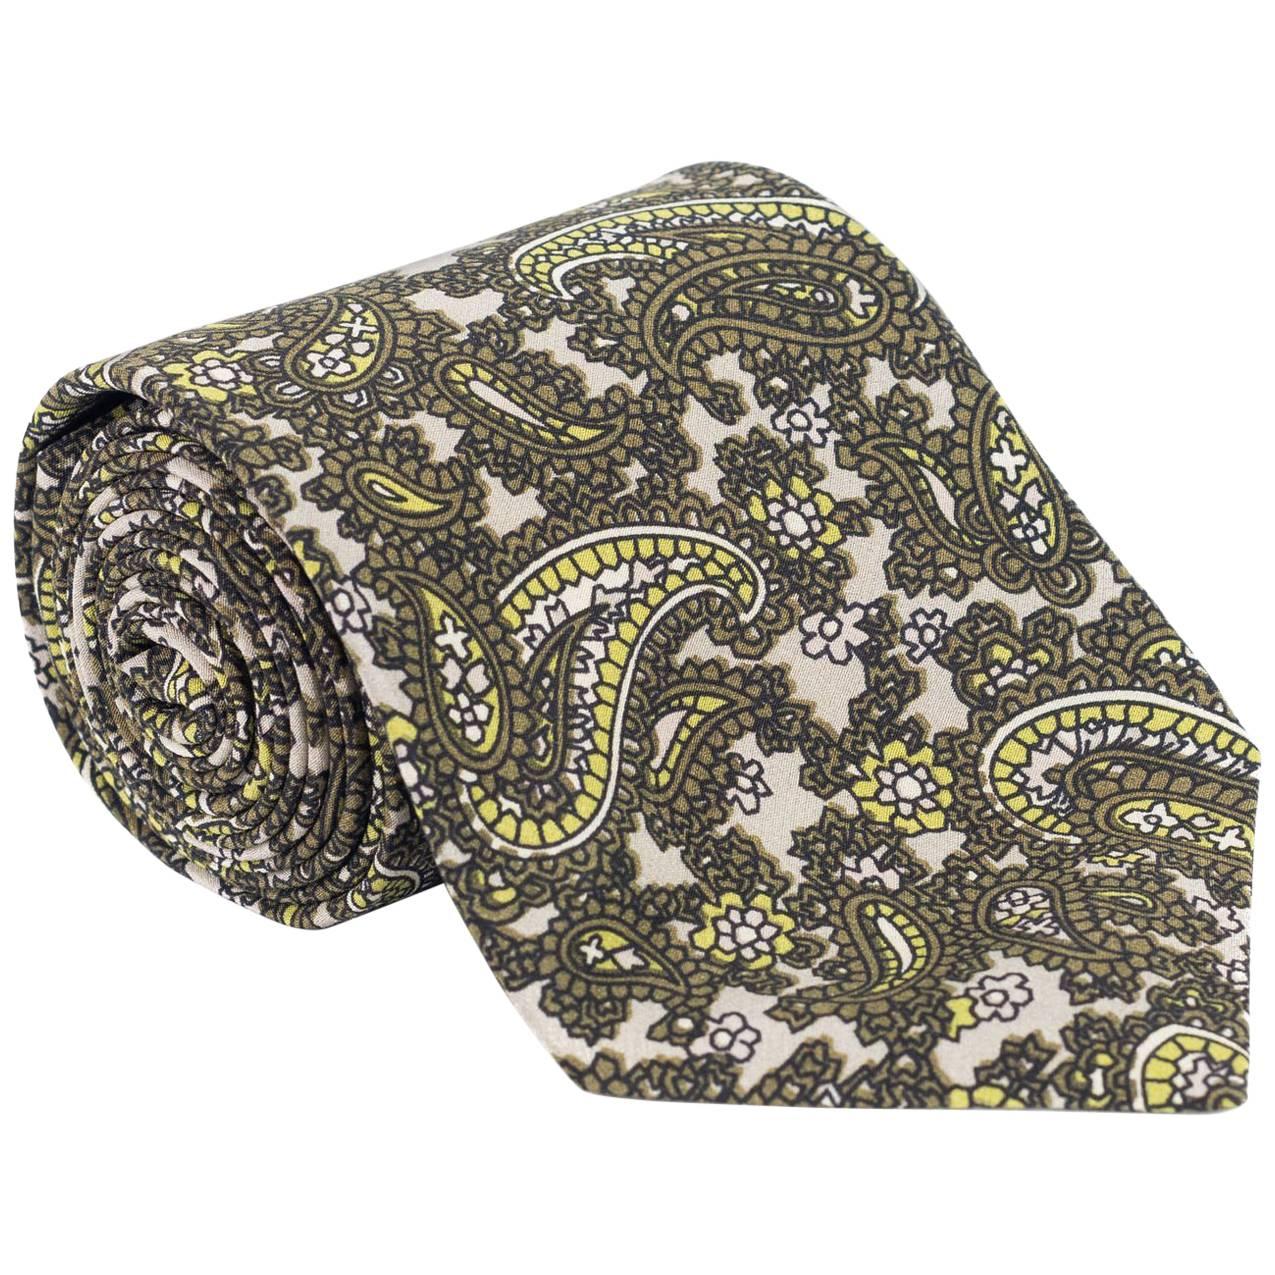 New Rare Tom Ford Luxurious Green Leaf Floral Paisley 3 1/4" Tie